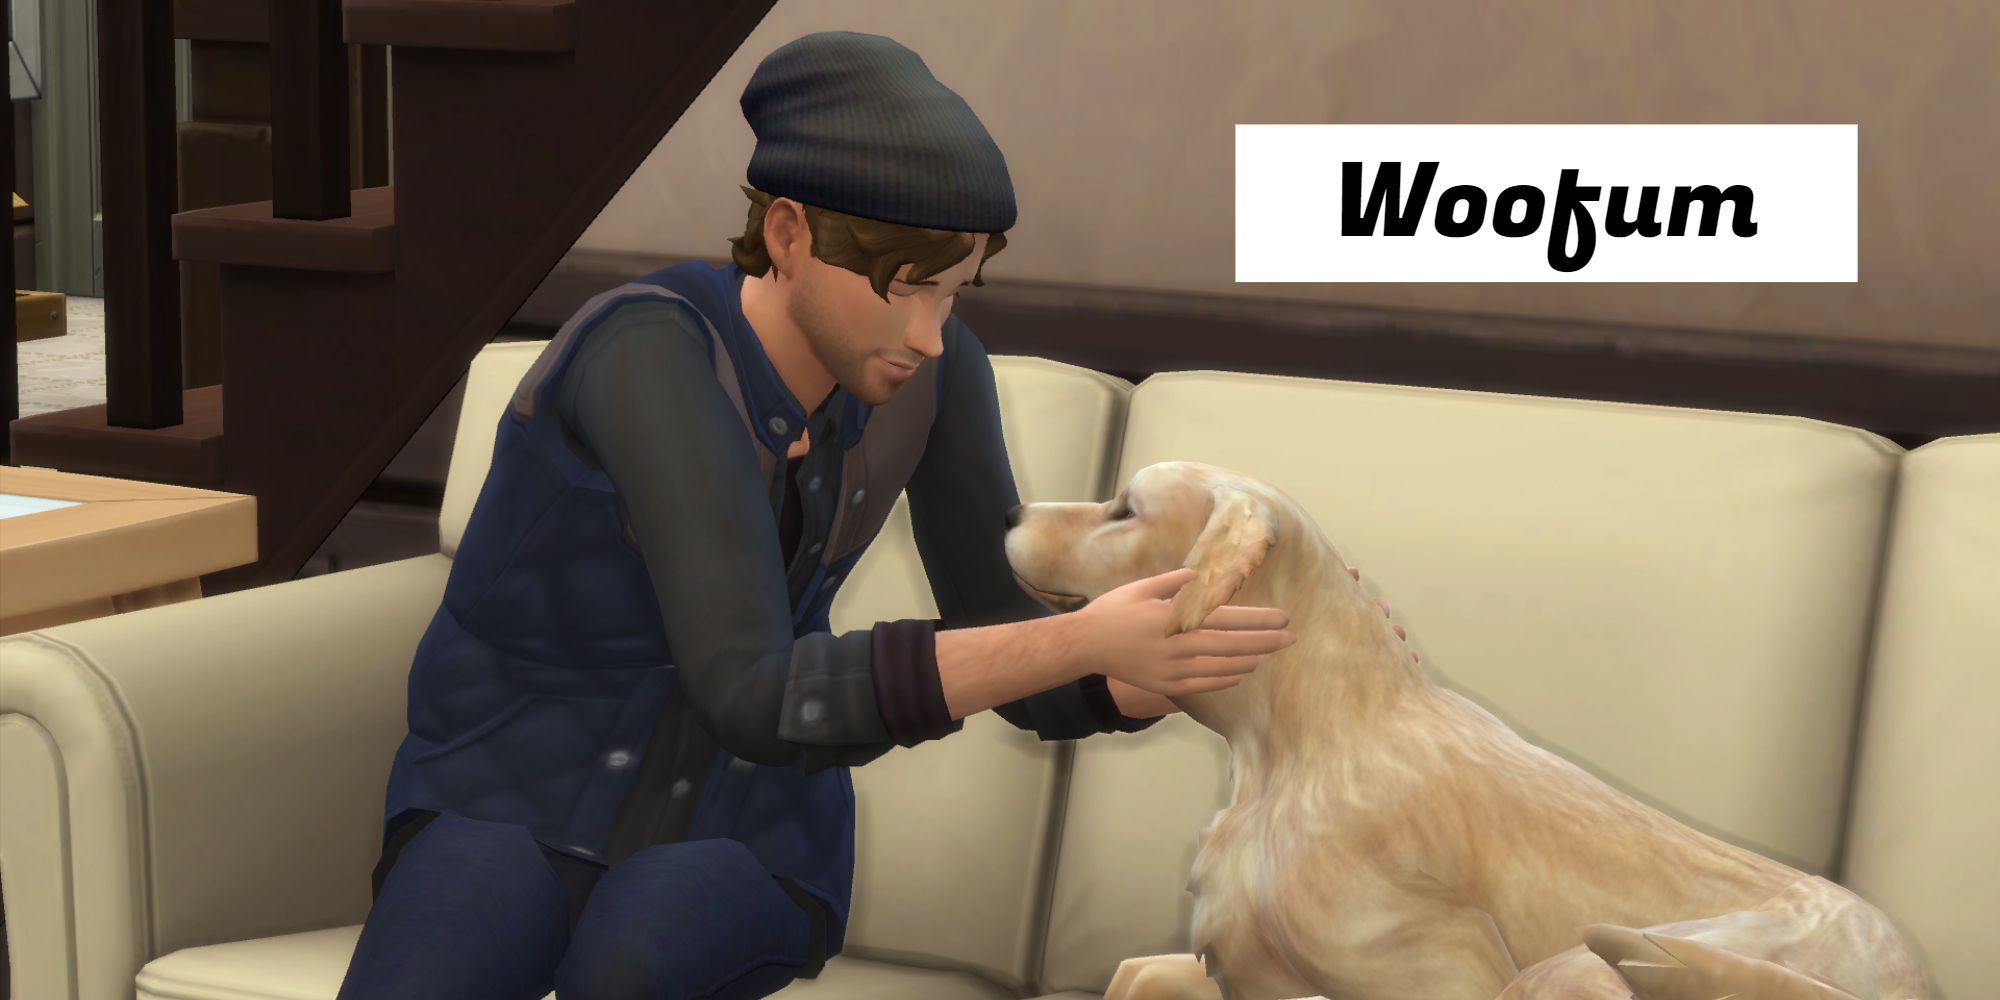 Woofum means Dog in Simlish, the language from The Sims games. Pictured is a dog and his owner on the couch.